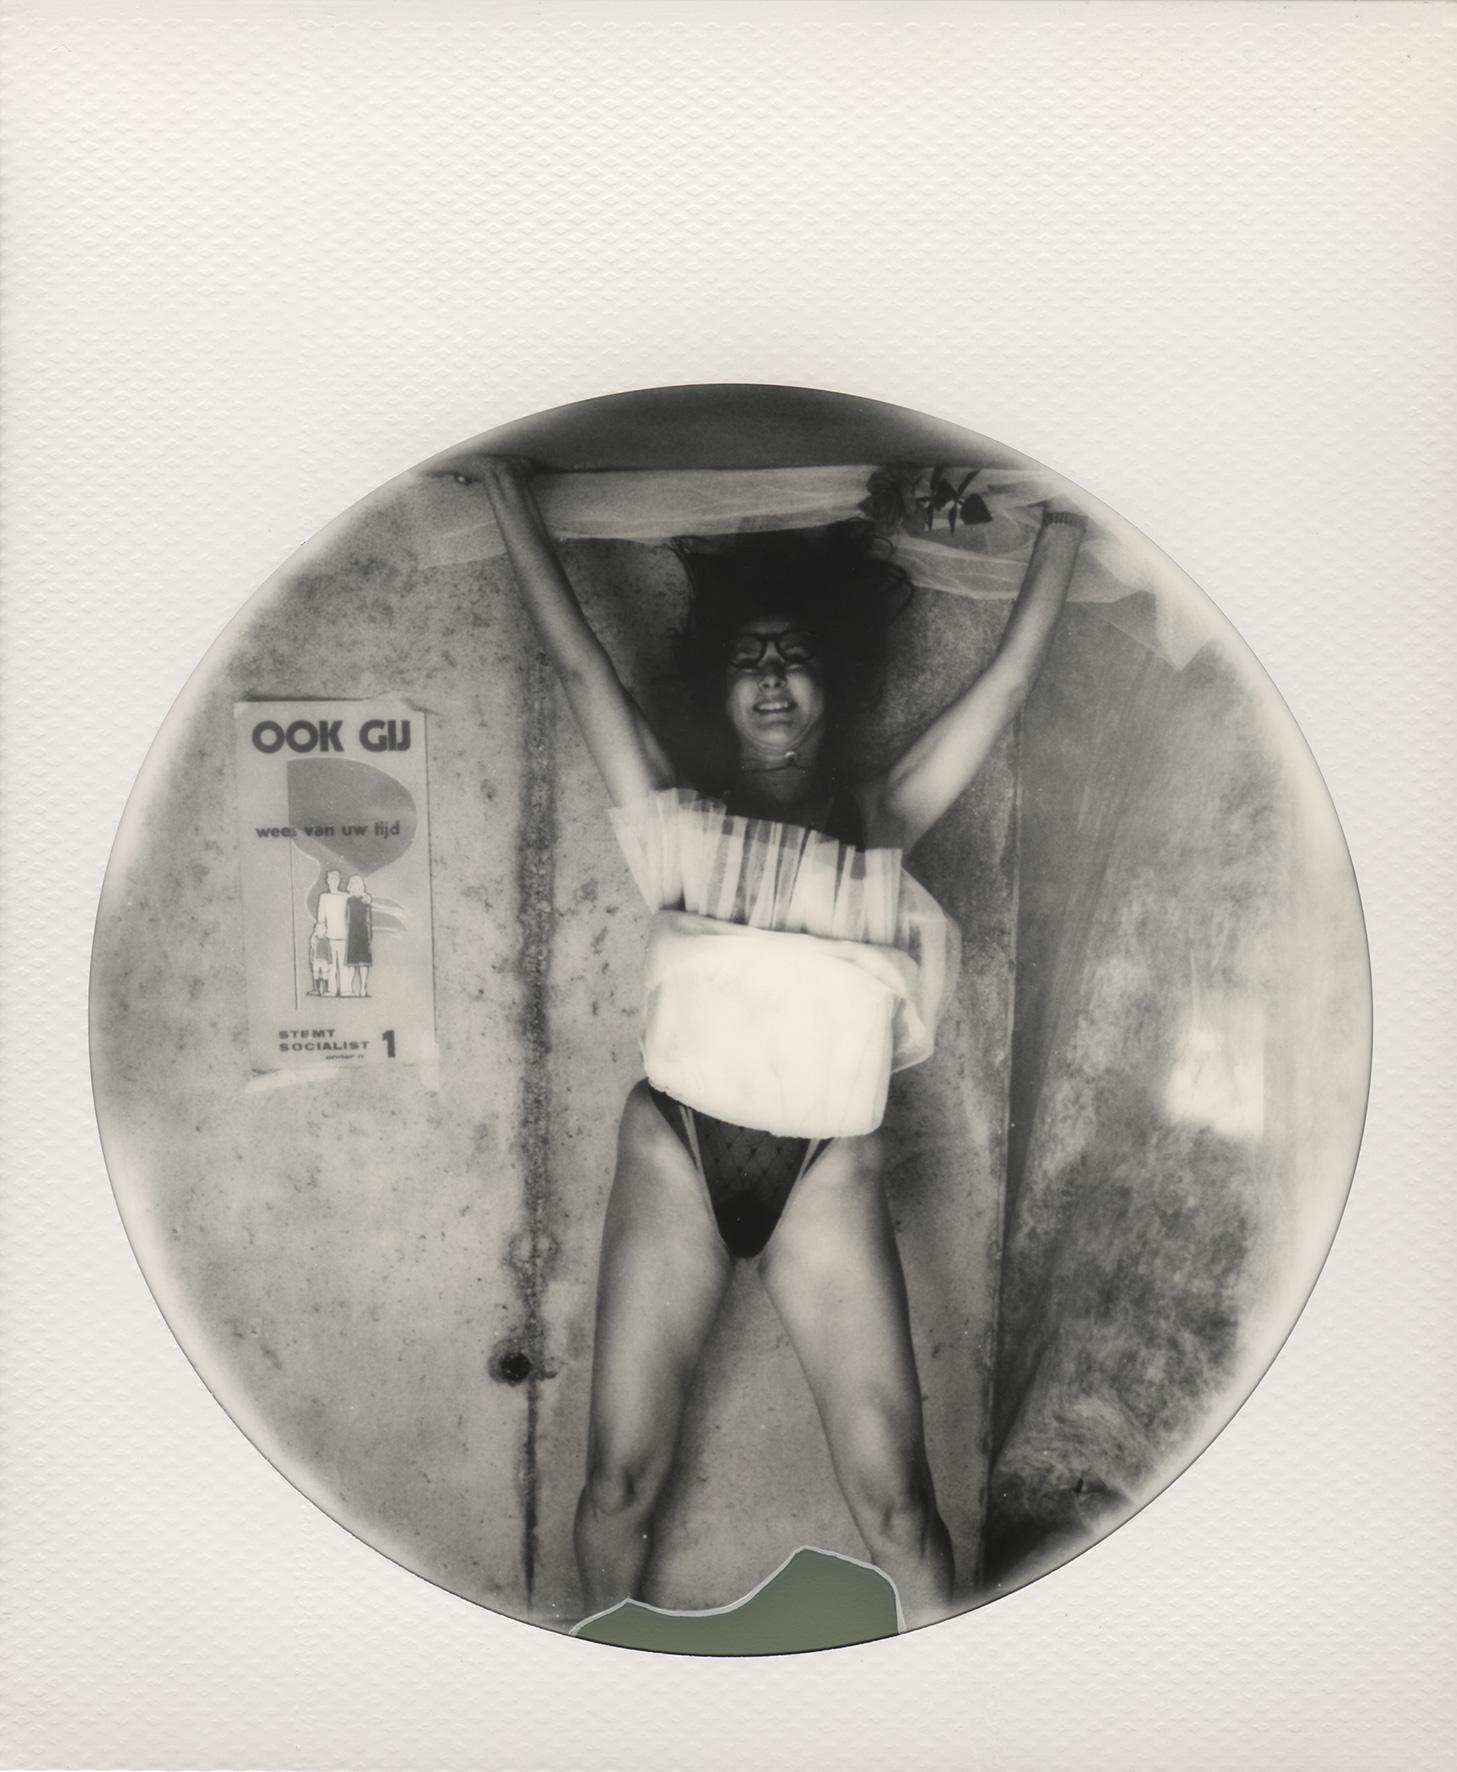 Topsy Turvy [From the series Need to be] - Polaroid